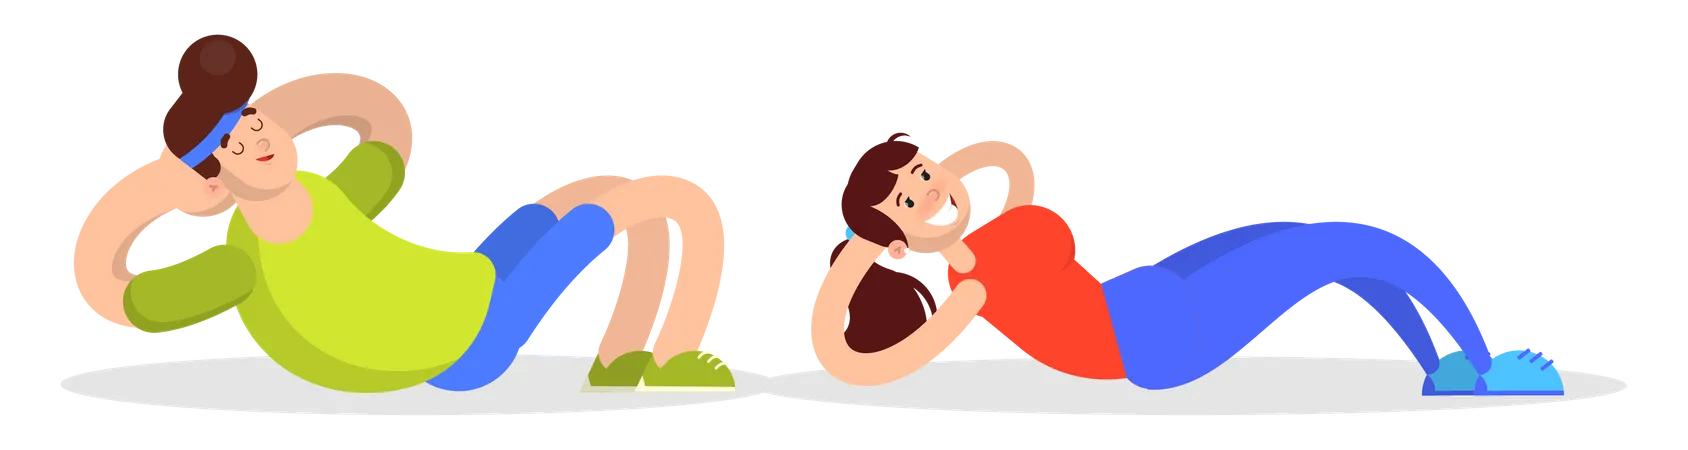 Woman and man doing abs exercise  Illustration